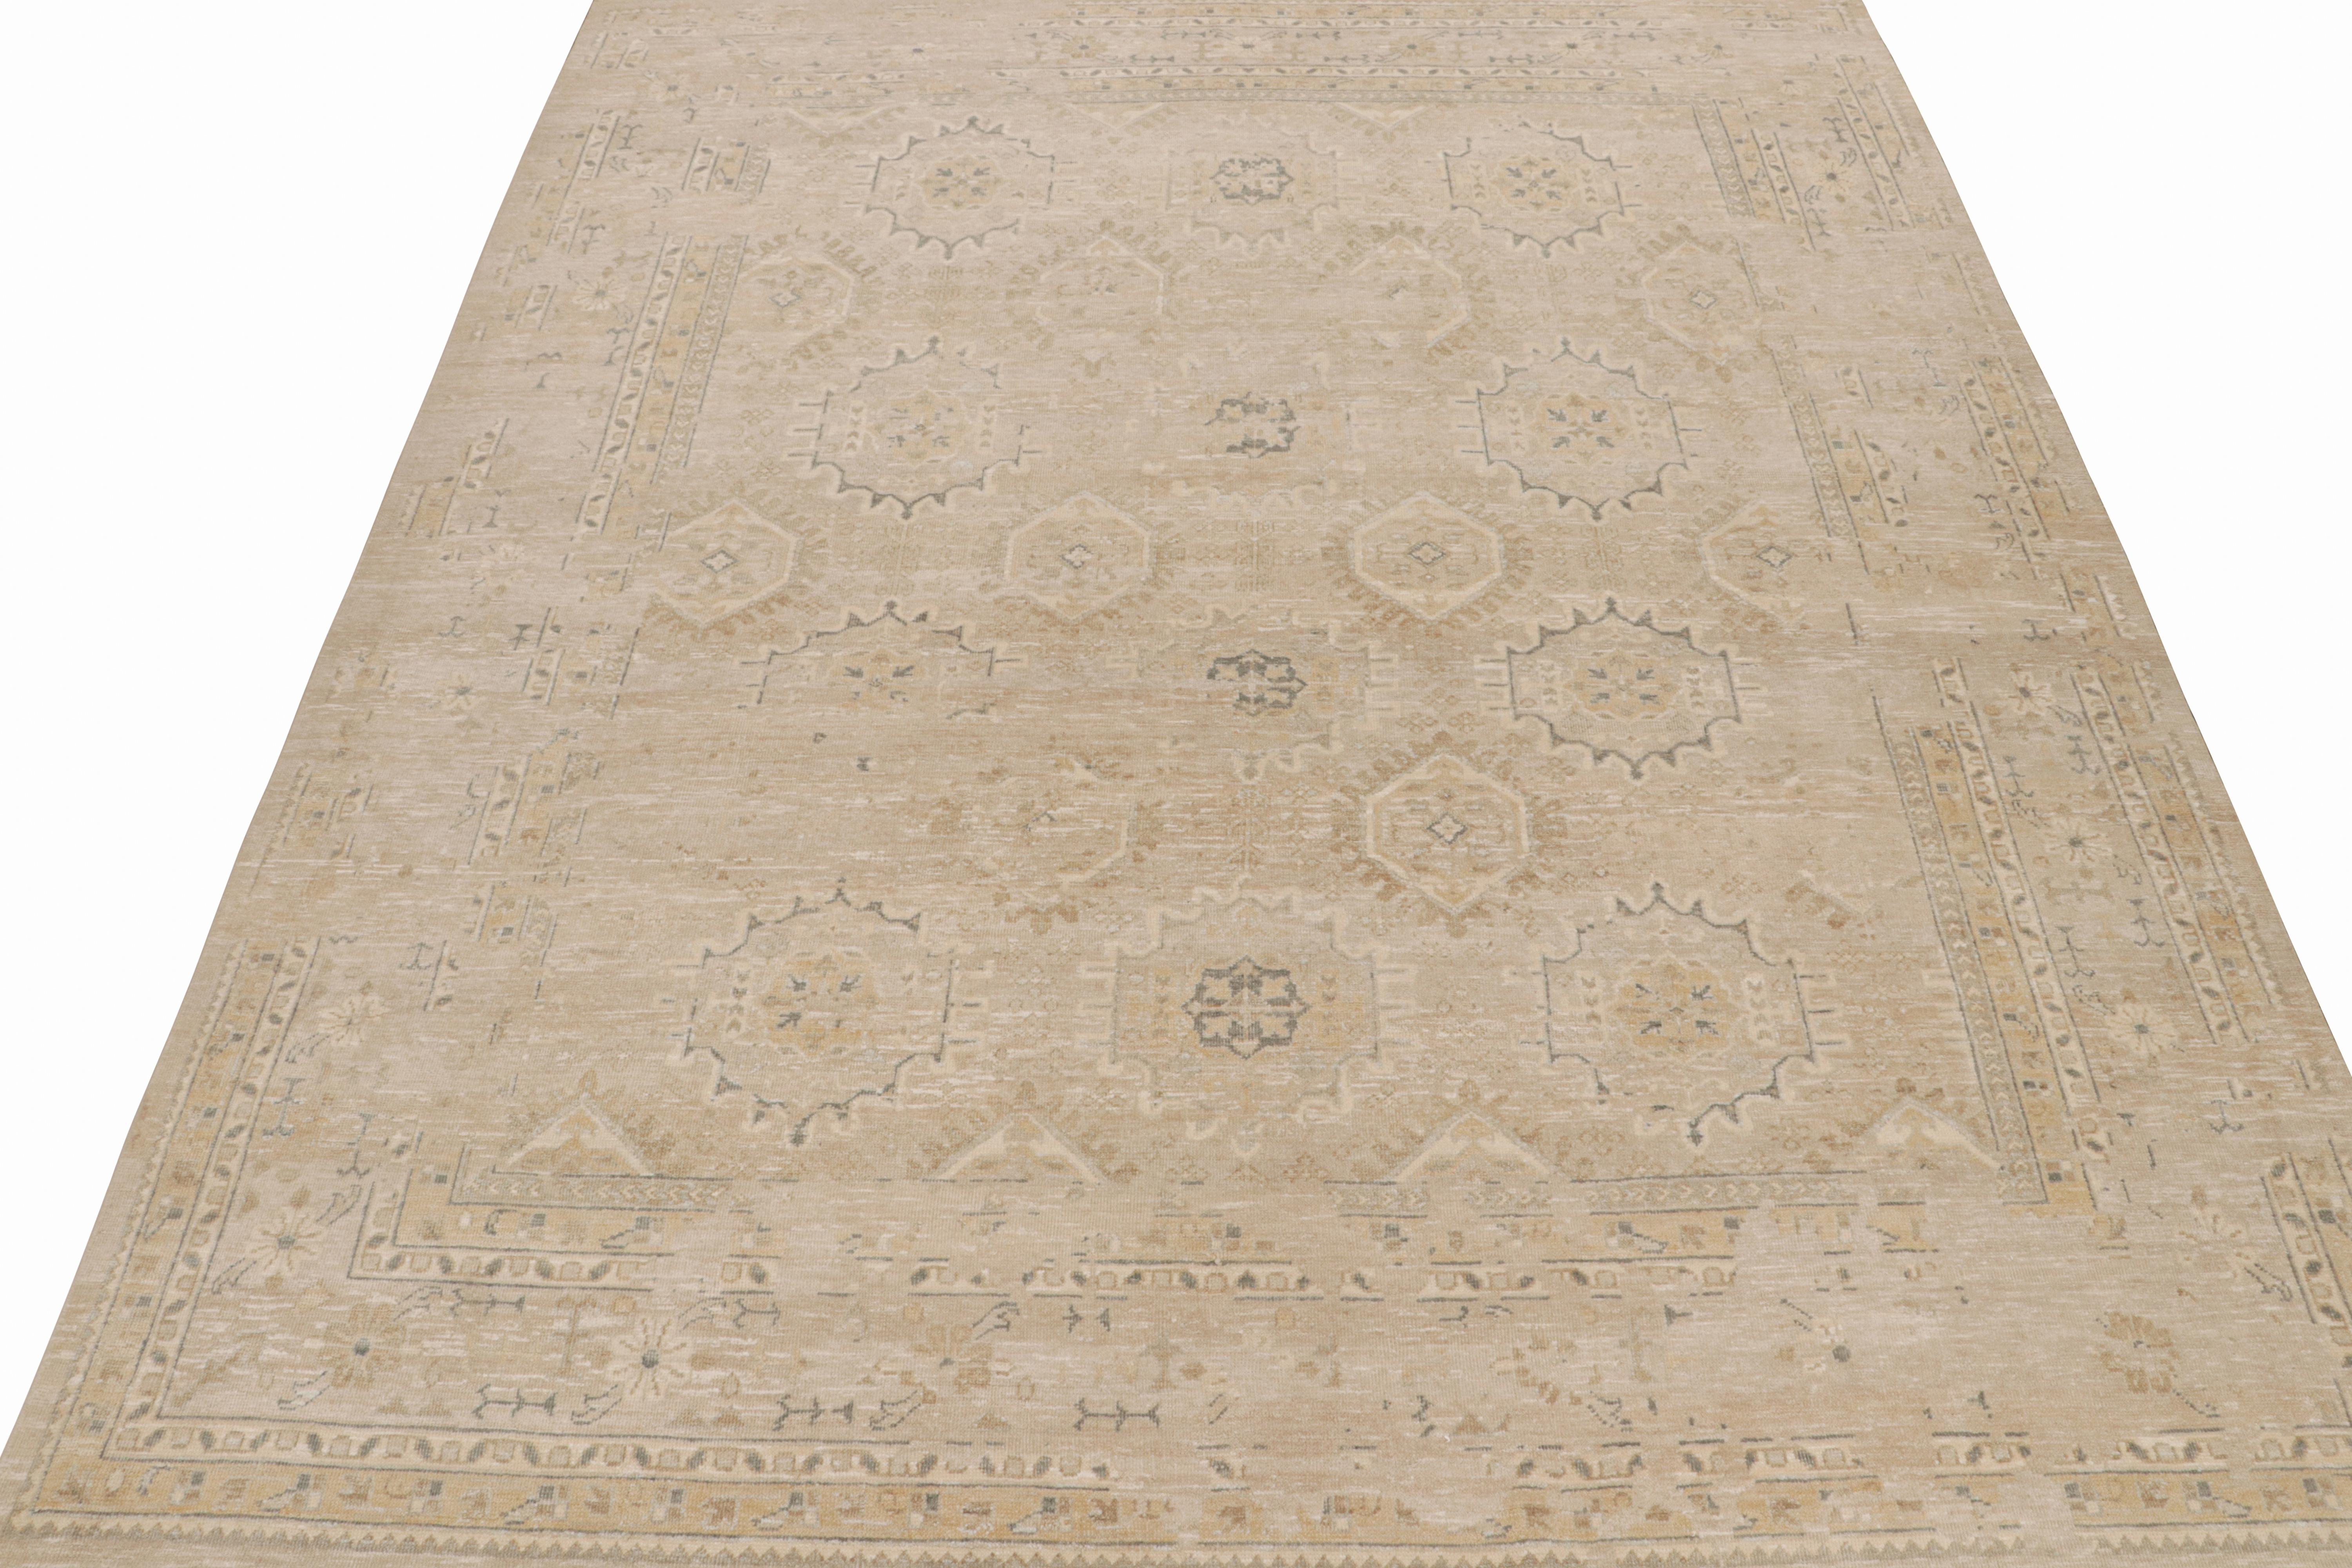 Indian Rug & Kilim’s Oushak Style Rug in Beige-Brown with Floral Patterns For Sale